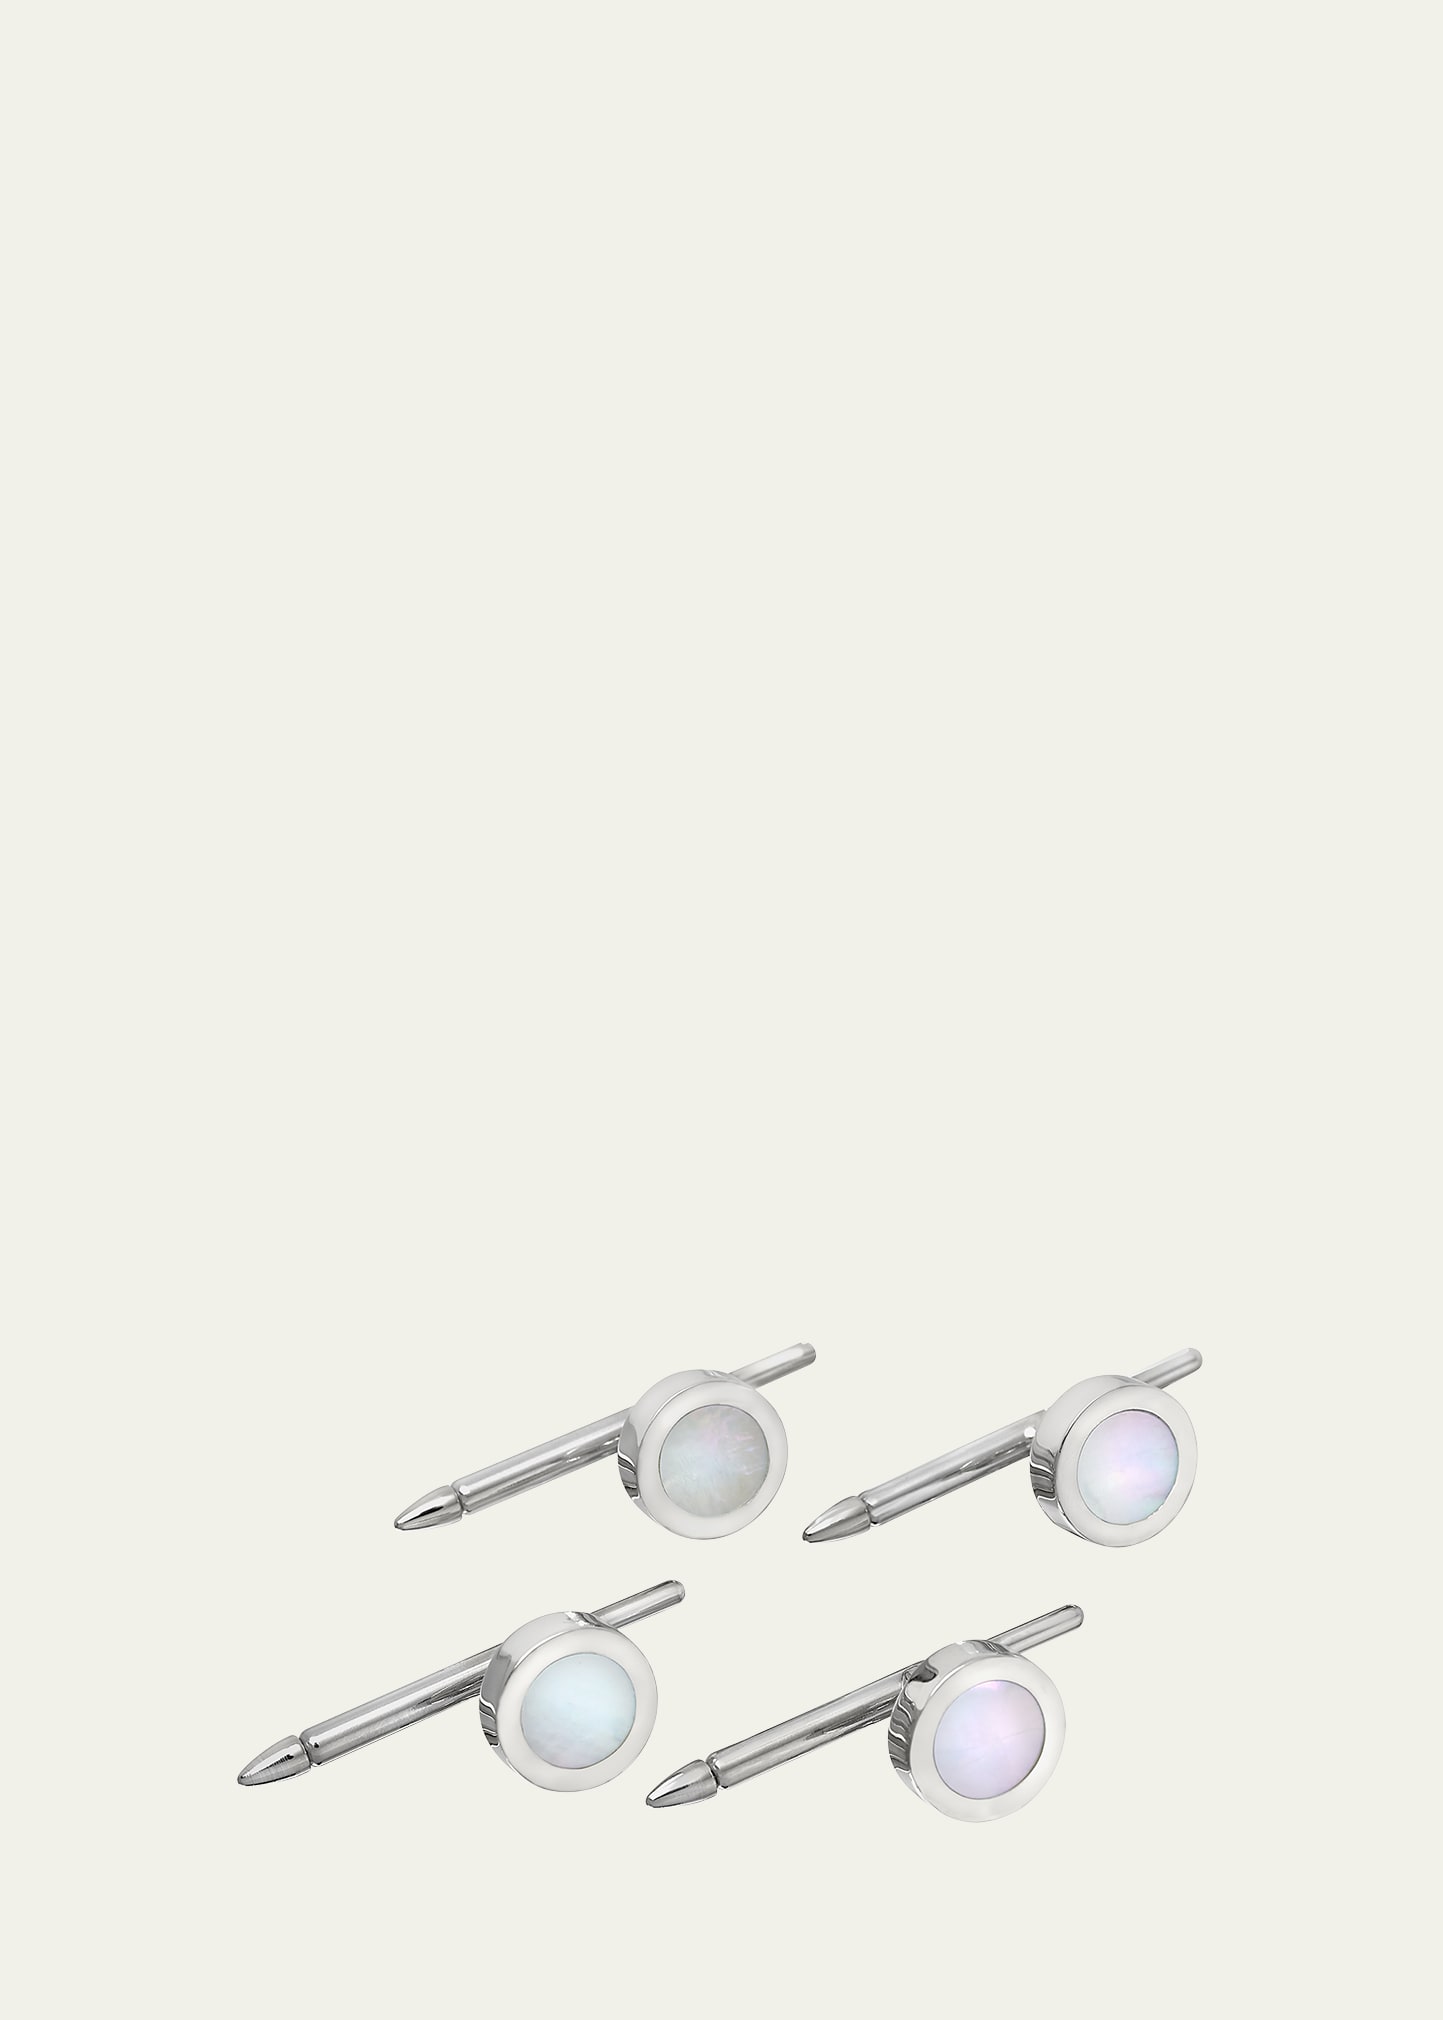 Men's 14K White Gold Mother-of-Pearl Shirt Studs